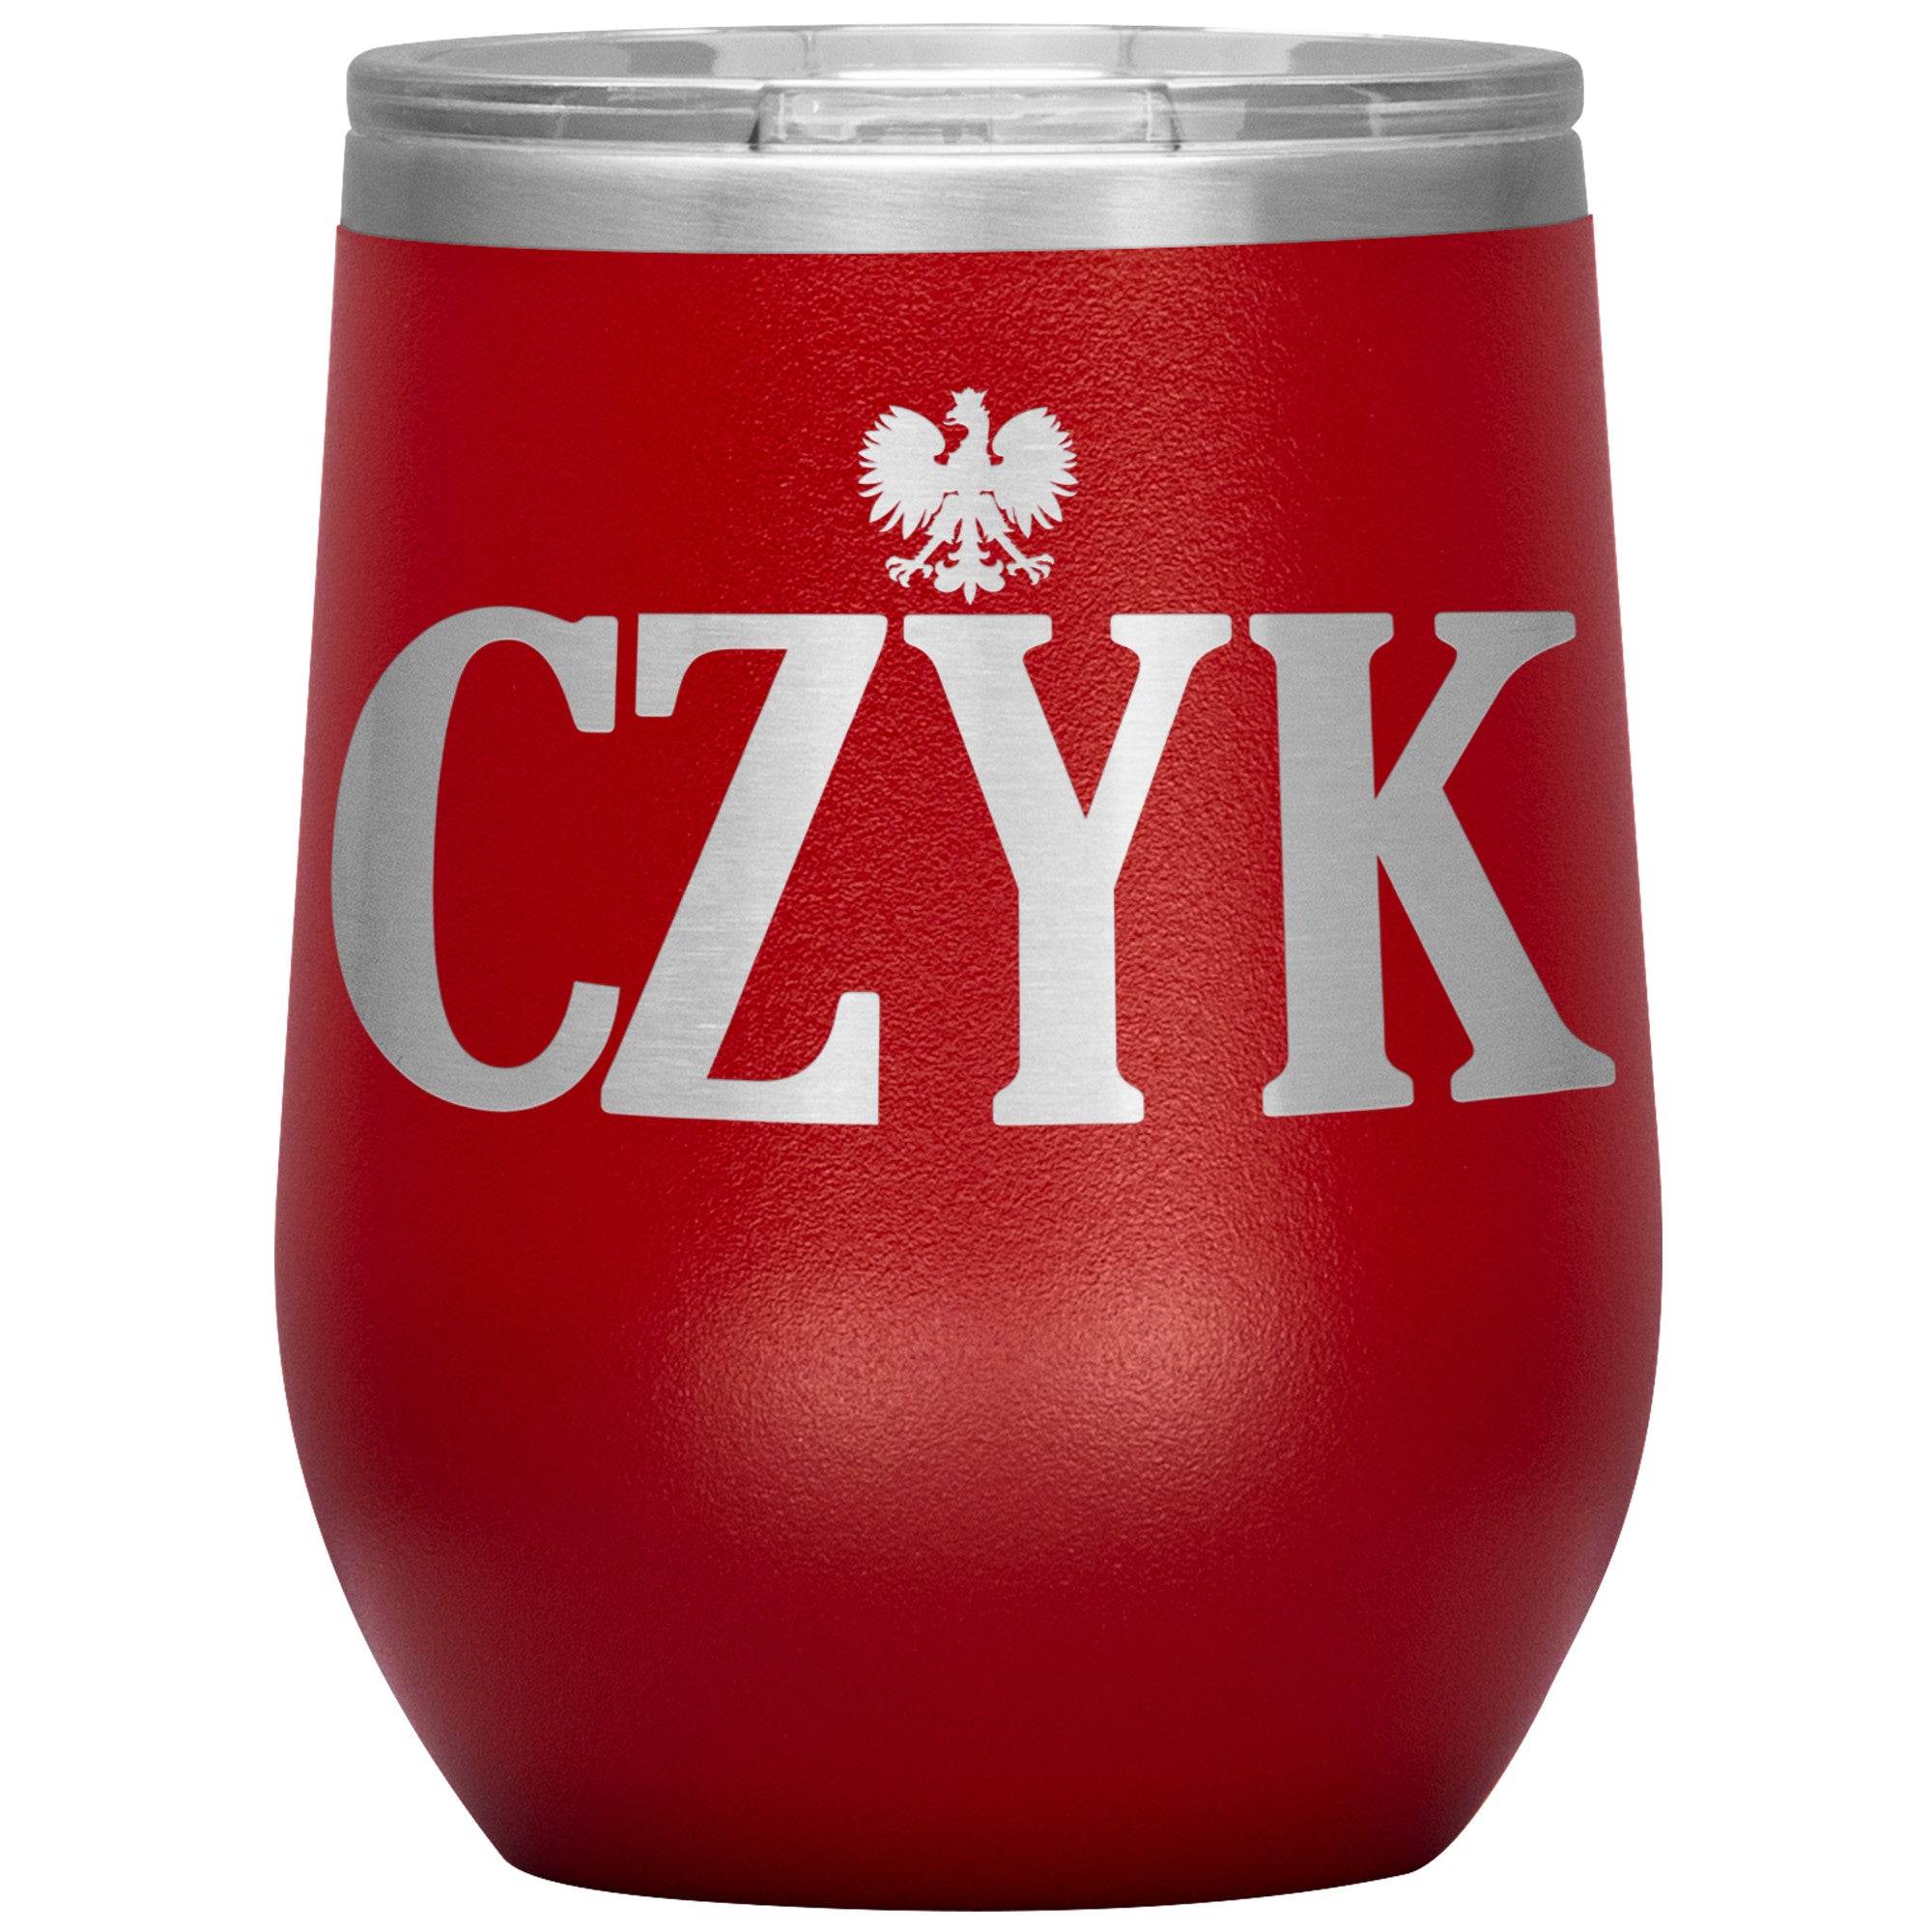 Polish Surnames Ending In CZYK Insulated Wine Tumbler Tumblers teelaunch Red  